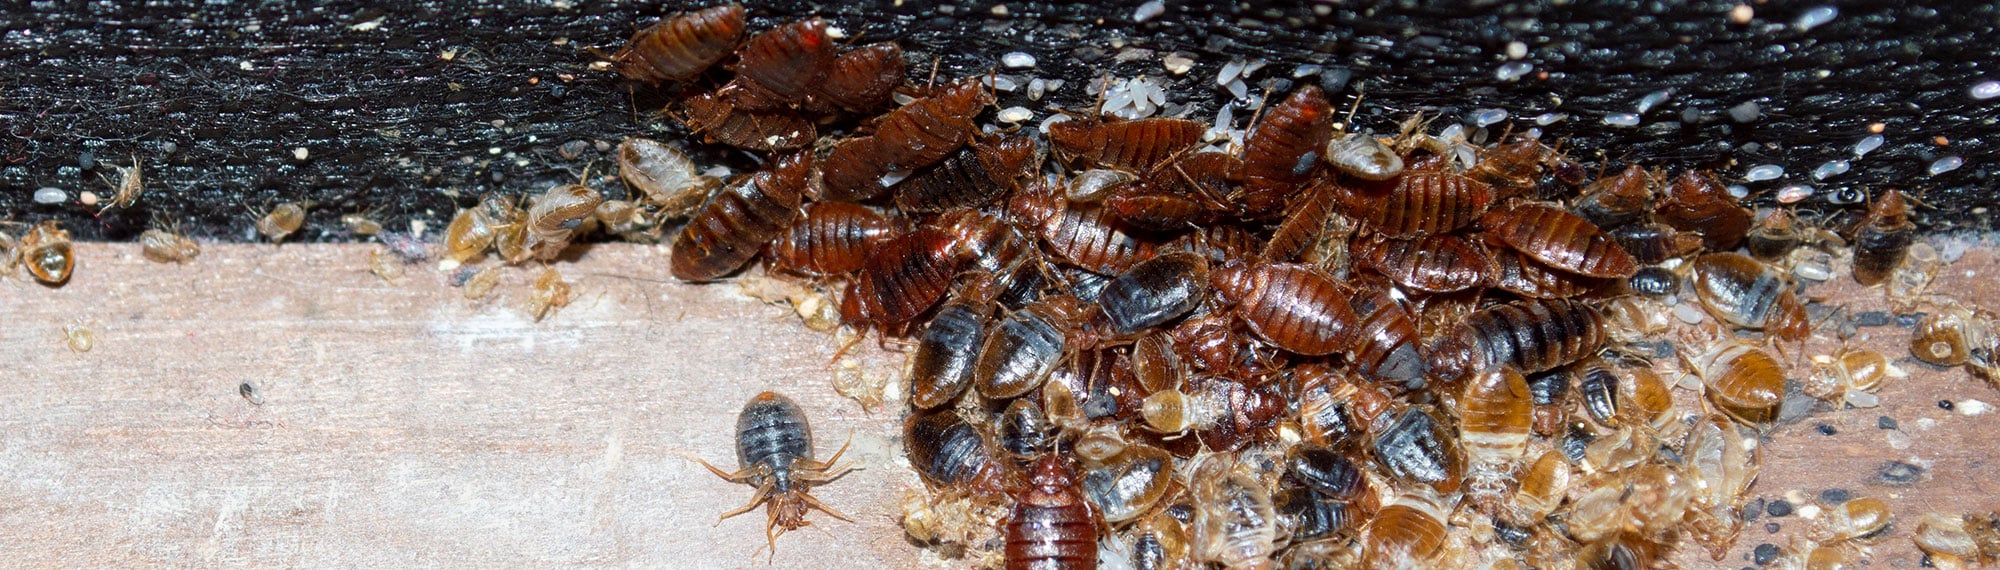 adult bed bugs, nymphs and bed bug eggs on a bedframe